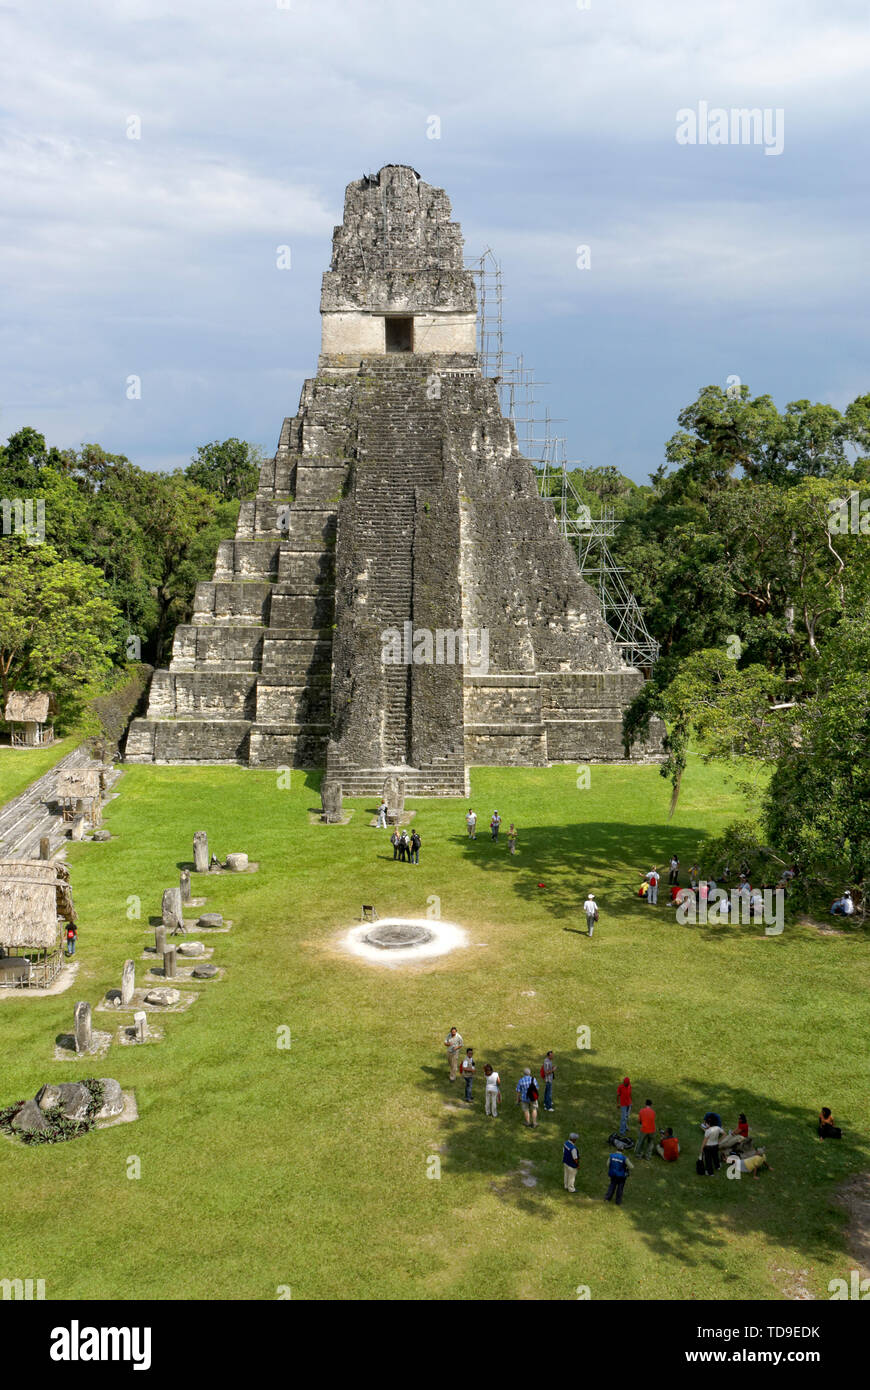 Tourists in the Grand Plaza in front of Temple I or Temple of the Grand Jaguar, Mayan ruins of Tikal, Guatemala, Central America Stock Photo